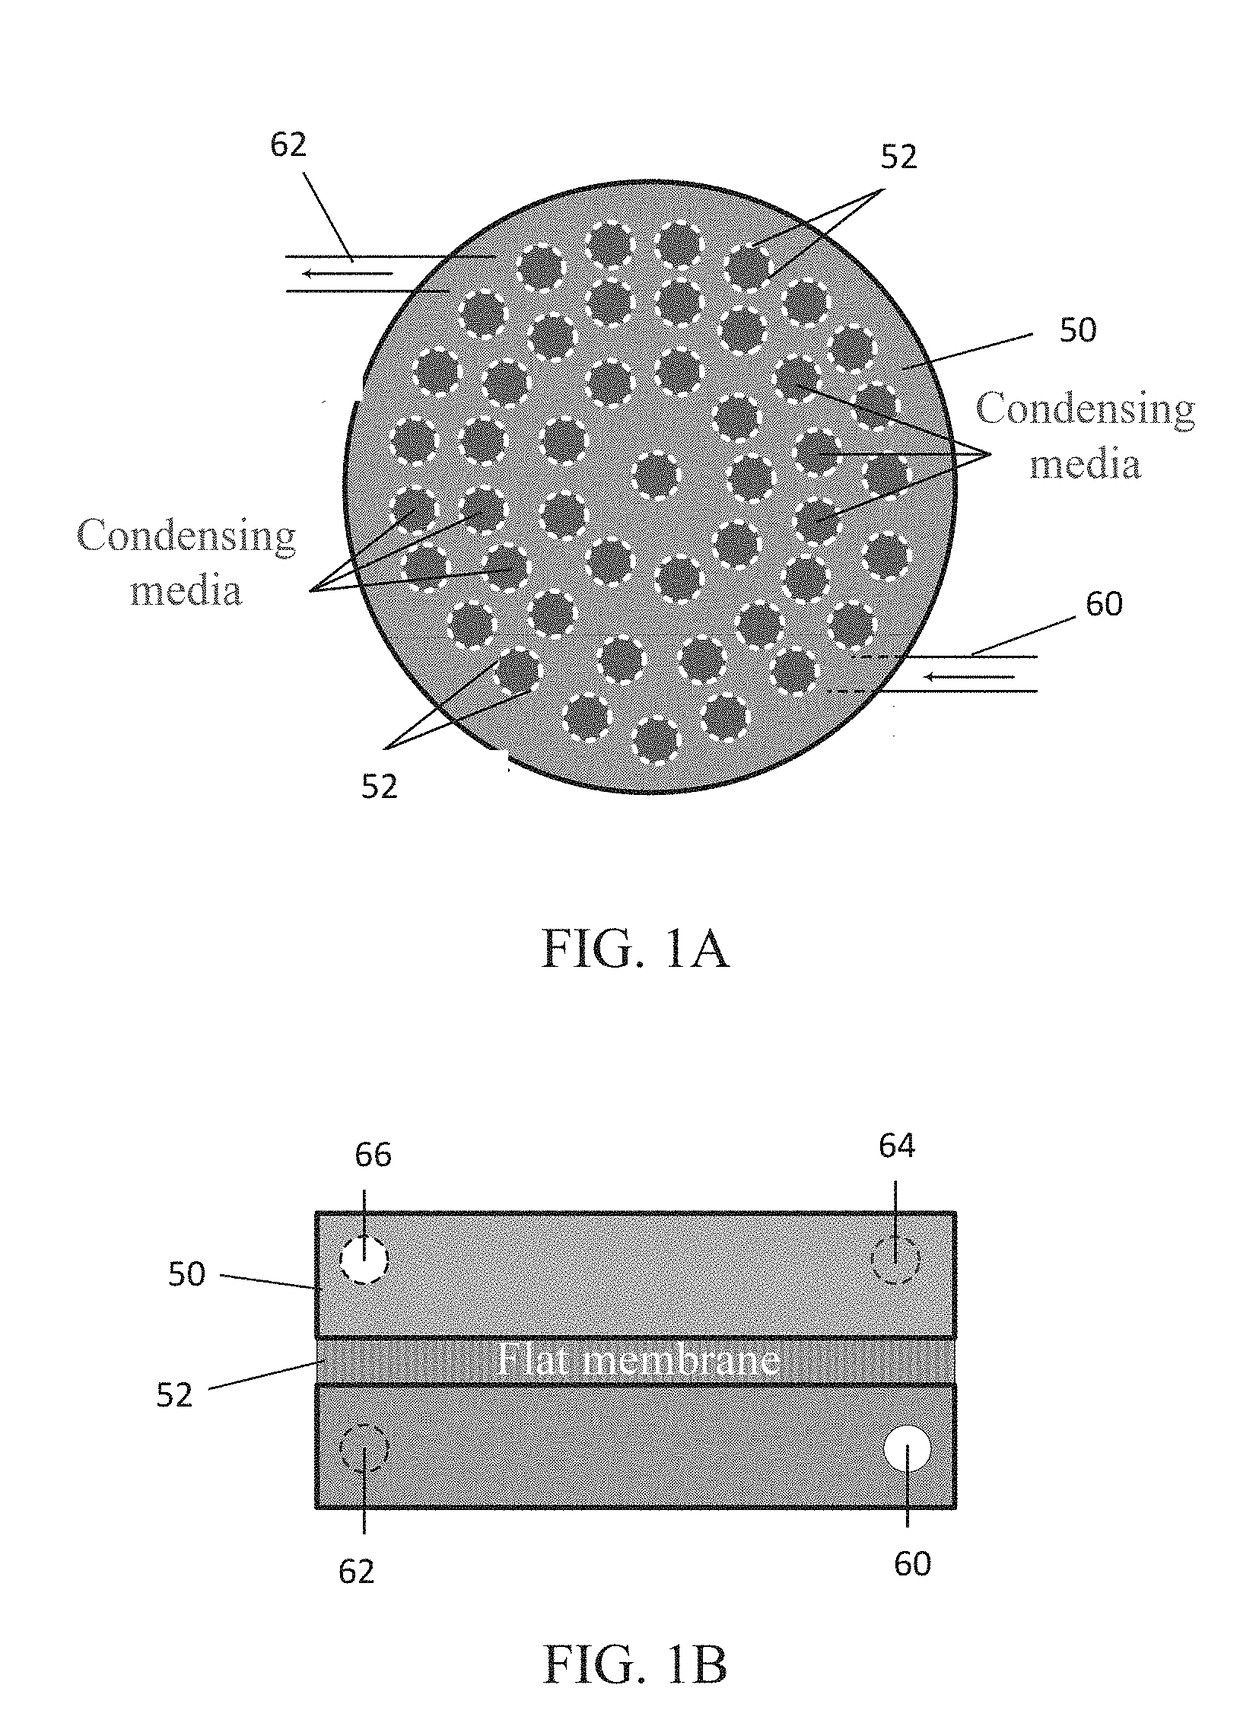 Systems and methods for maximizing recovery in membrane distillation